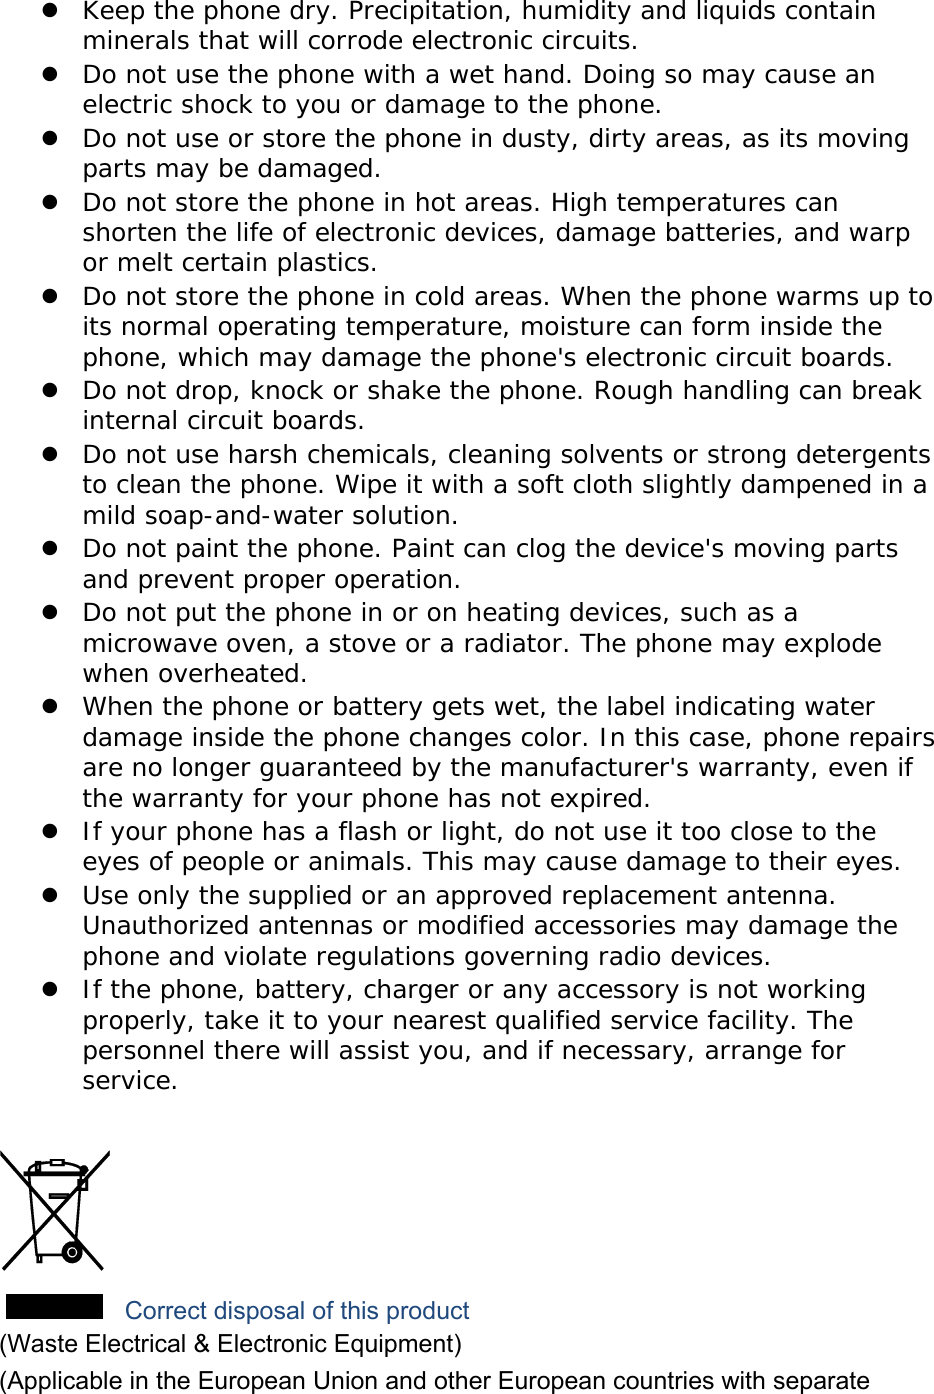  Keep the phone dry. Precipitation, humidity and liquids contain minerals that will corrode electronic circuits.  Do not use the phone with a wet hand. Doing so may cause an electric shock to you or damage to the phone.  Do not use or store the phone in dusty, dirty areas, as its moving parts may be damaged.  Do not store the phone in hot areas. High temperatures can shorten the life of electronic devices, damage batteries, and warp or melt certain plastics.  Do not store the phone in cold areas. When the phone warms up to its normal operating temperature, moisture can form inside the phone, which may damage the phone&apos;s electronic circuit boards.  Do not drop, knock or shake the phone. Rough handling can break internal circuit boards.  Do not use harsh chemicals, cleaning solvents or strong detergents to clean the phone. Wipe it with a soft cloth slightly dampened in a mild soap-and-water solution.  Do not paint the phone. Paint can clog the device&apos;s moving parts and prevent proper operation.  Do not put the phone in or on heating devices, such as a microwave oven, a stove or a radiator. The phone may explode when overheated.  When the phone or battery gets wet, the label indicating water damage inside the phone changes color. In this case, phone repairs are no longer guaranteed by the manufacturer&apos;s warranty, even if the warranty for your phone has not expired.   If your phone has a flash or light, do not use it too close to the eyes of people or animals. This may cause damage to their eyes.  Use only the supplied or an approved replacement antenna. Unauthorized antennas or modified accessories may damage the phone and violate regulations governing radio devices.  If the phone, battery, charger or any accessory is not working properly, take it to your nearest qualified service facility. The personnel there will assist you, and if necessary, arrange for service.   Correct disposal of this product (Waste Electrical &amp; Electronic Equipment) (Applicable in the European Union and other European countries with separate 